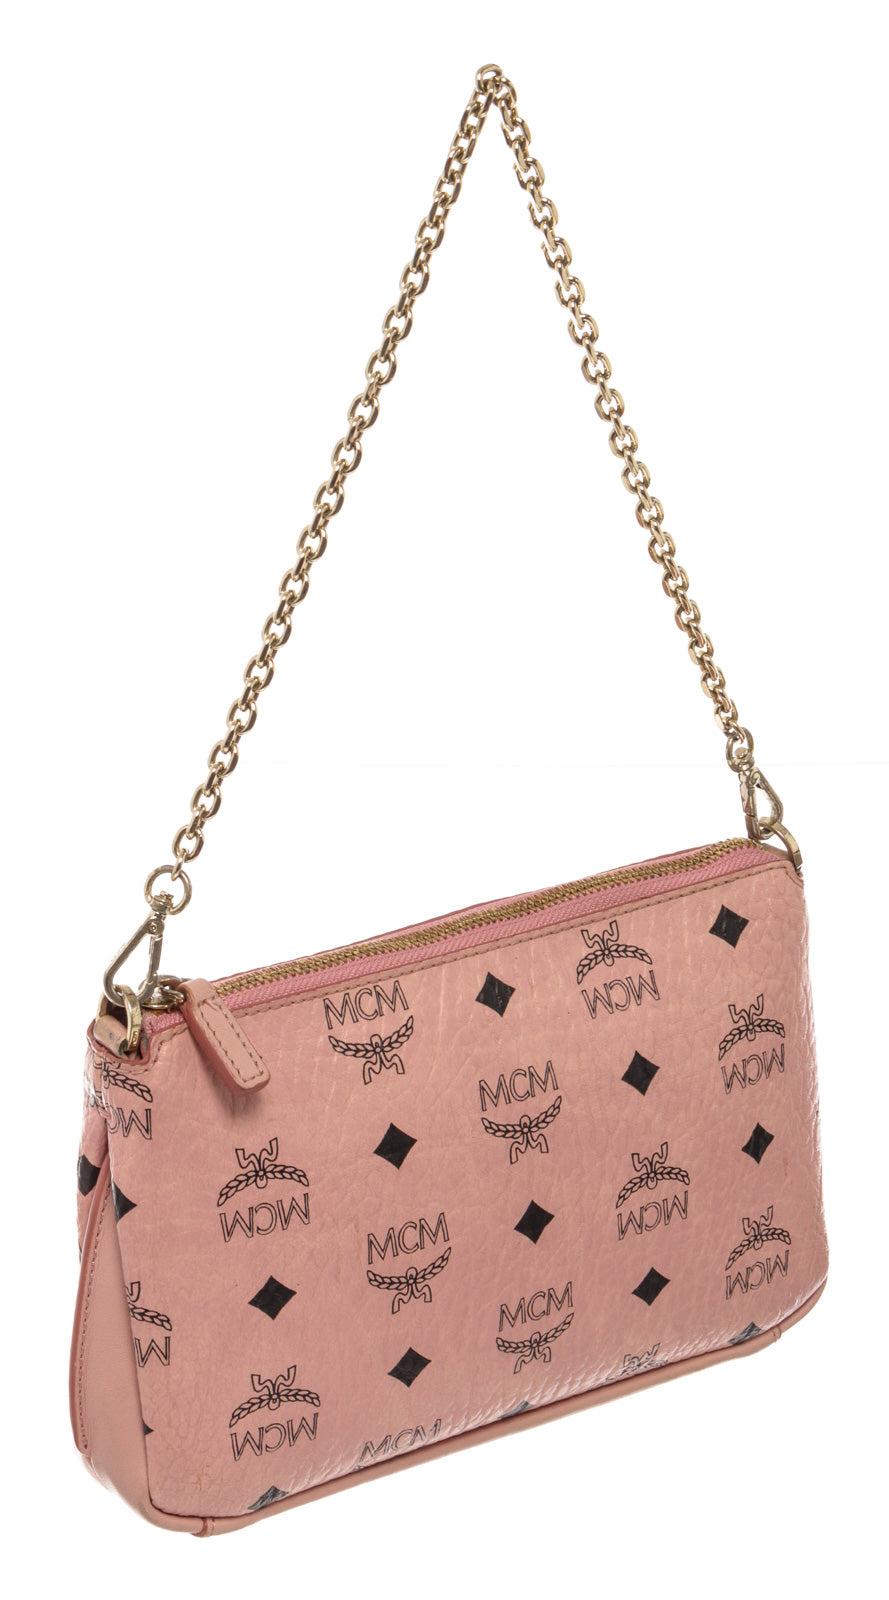 MCM Millie Top Zip small shoulder bag is crafted in soft pink Monogram Visetos coated canvas and beige canvas lining with slip pocket inside. This small bag is the perfect piece for finishing off a hip ensemble. The gold-tone hardware is blended